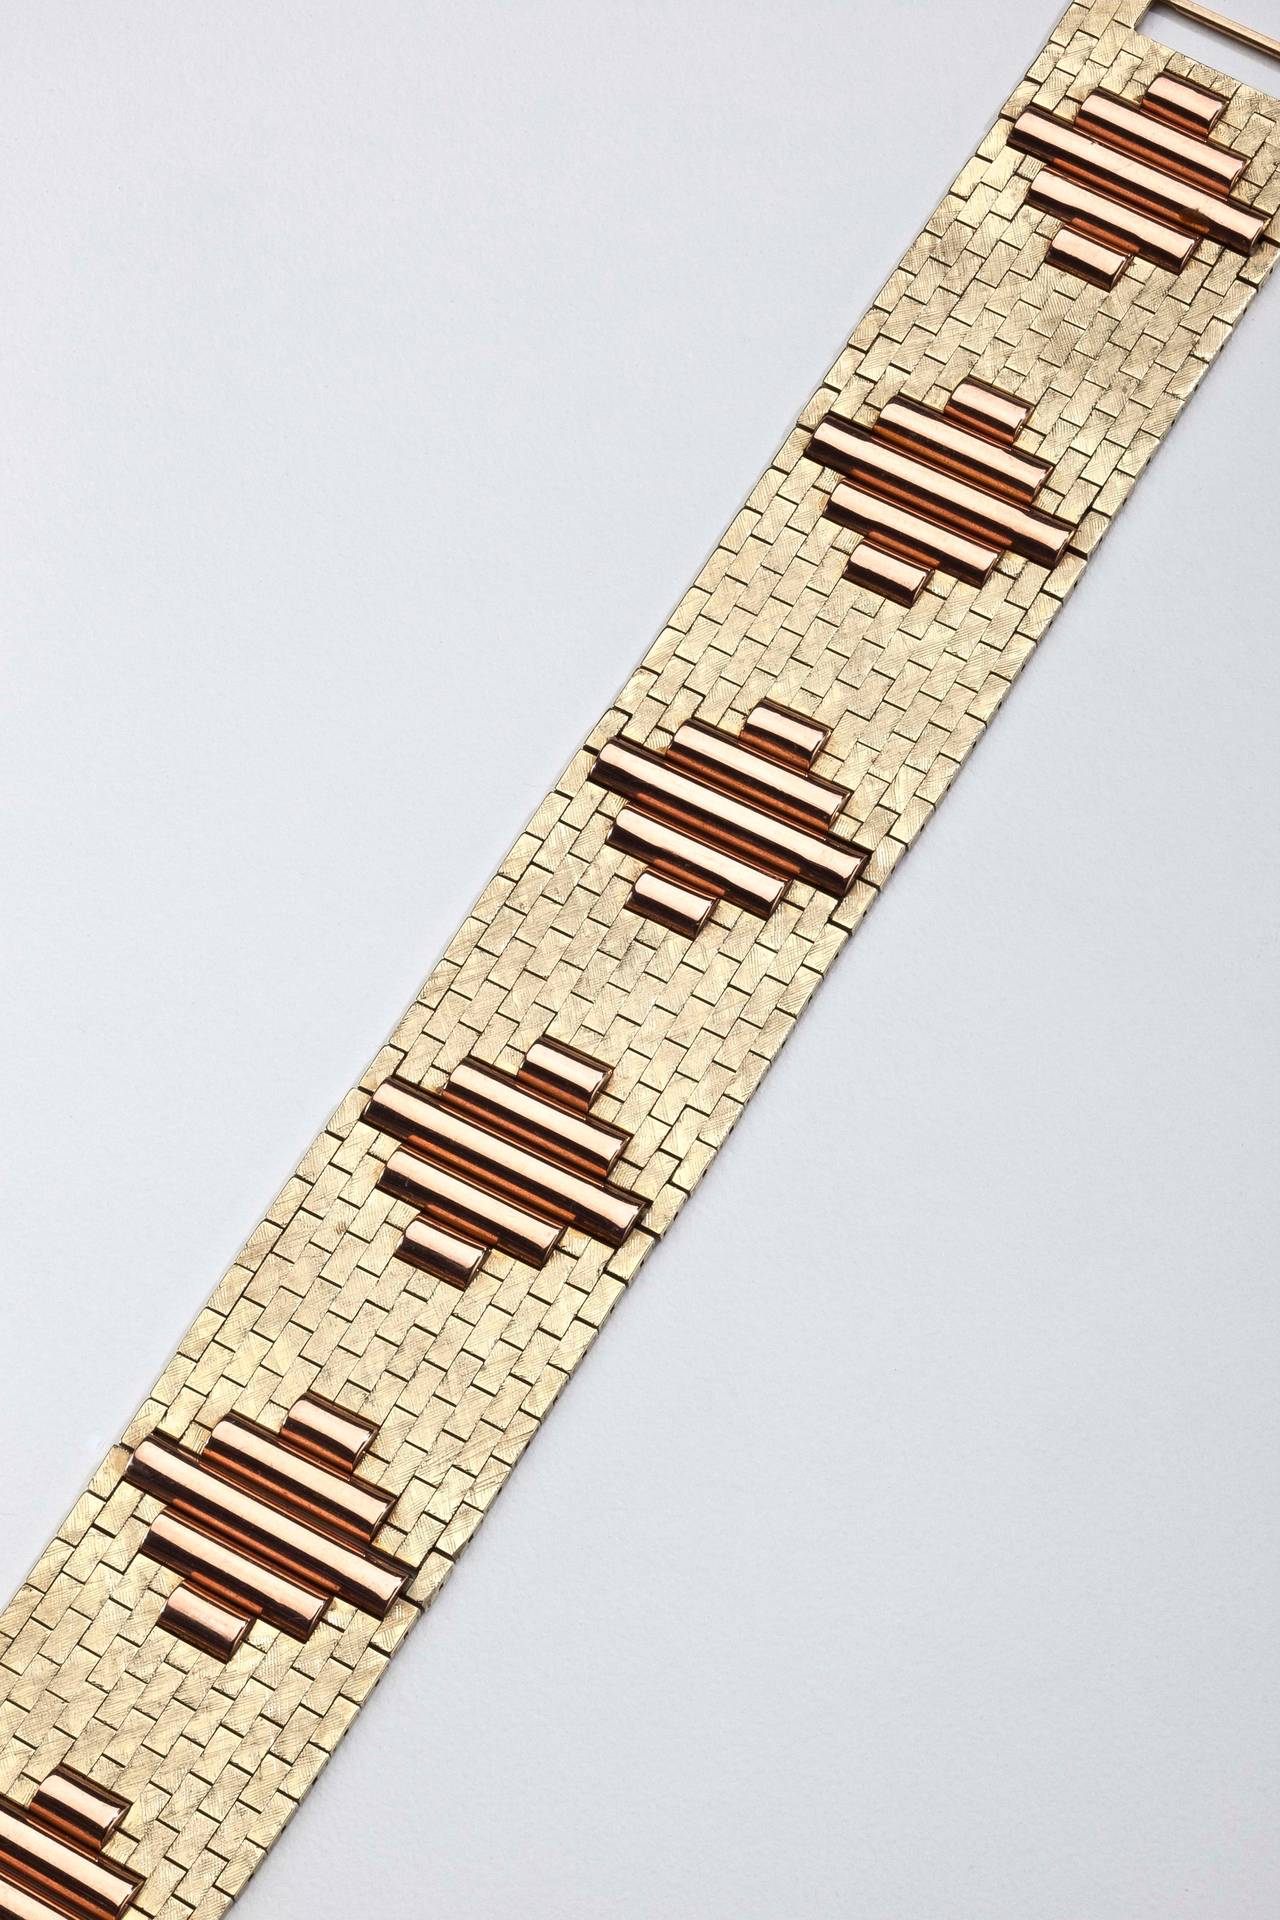 A 14 karat gold bracelet from the 1940's by Tiffany.  The bracelet is highlighted by a brick and column design in alternating patterns of yellow gold and pink gold with a textured finish.  Signed Tiffany & Co,14K on clasp.